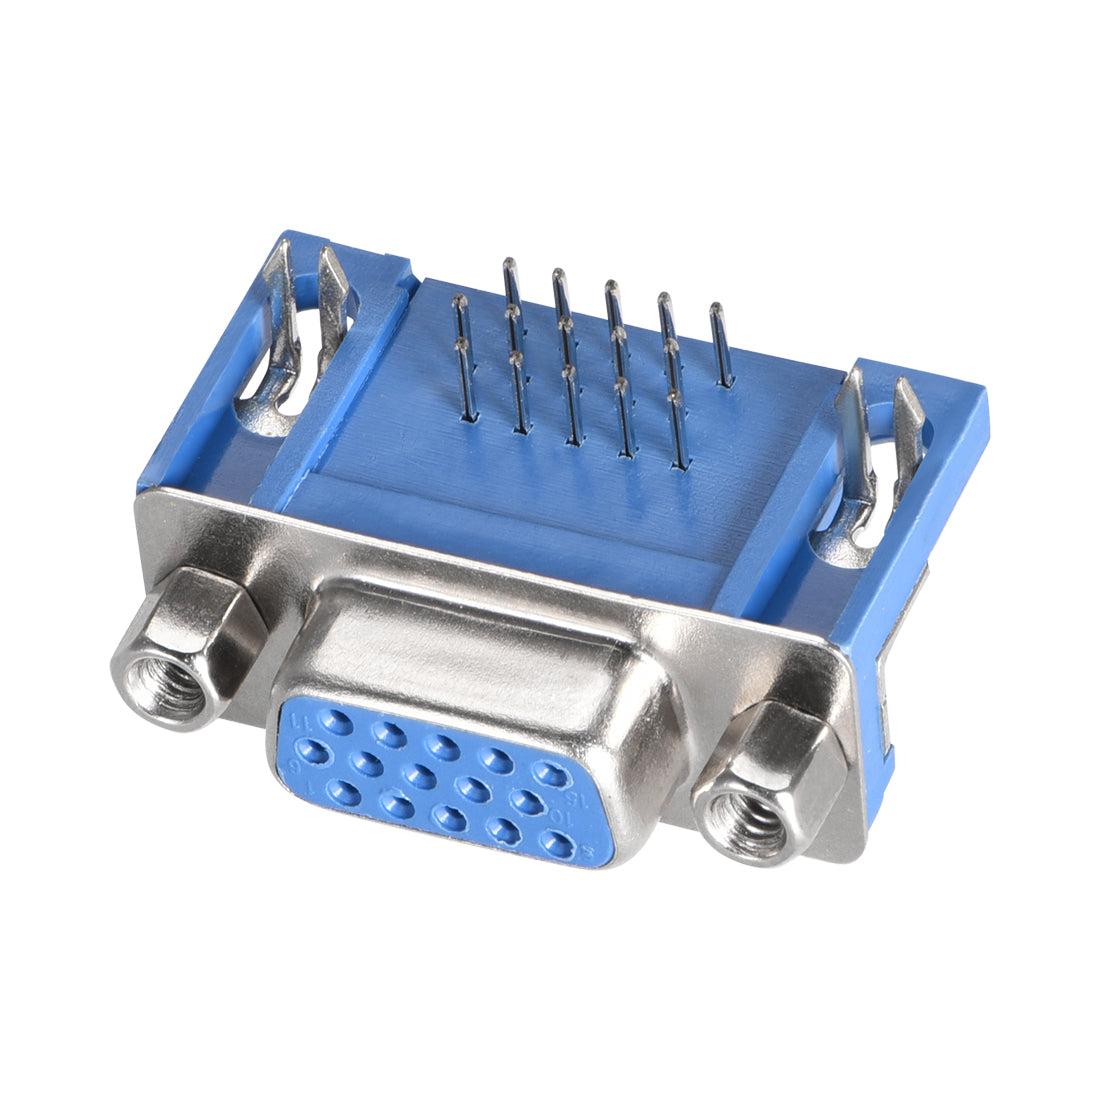 uxcell Uxcell D-sub Connector Female Socket 15-pin 3-row Right Angle Port Terminal Breakout for Mechanical Equipment Blue 1pc